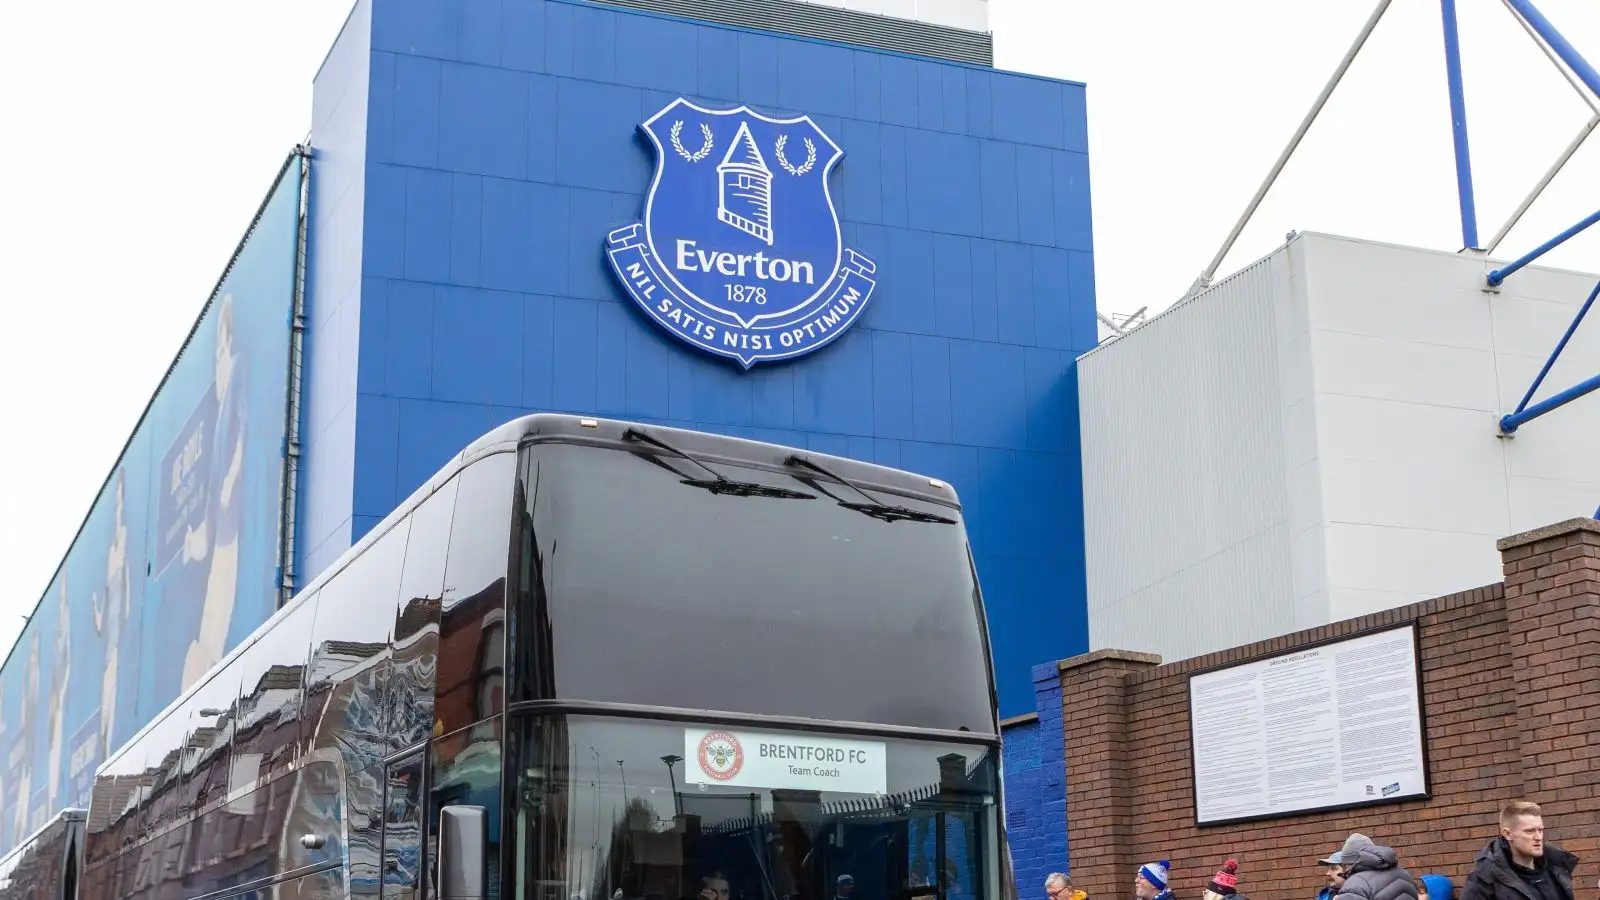 c?url=https%3A%2F%2Fd2x51gyc4ptf2q.cloudfront.net%2Fcontent%2Fuploads%2F2023%2F10%2F26143042%2FView outside Goodison Park